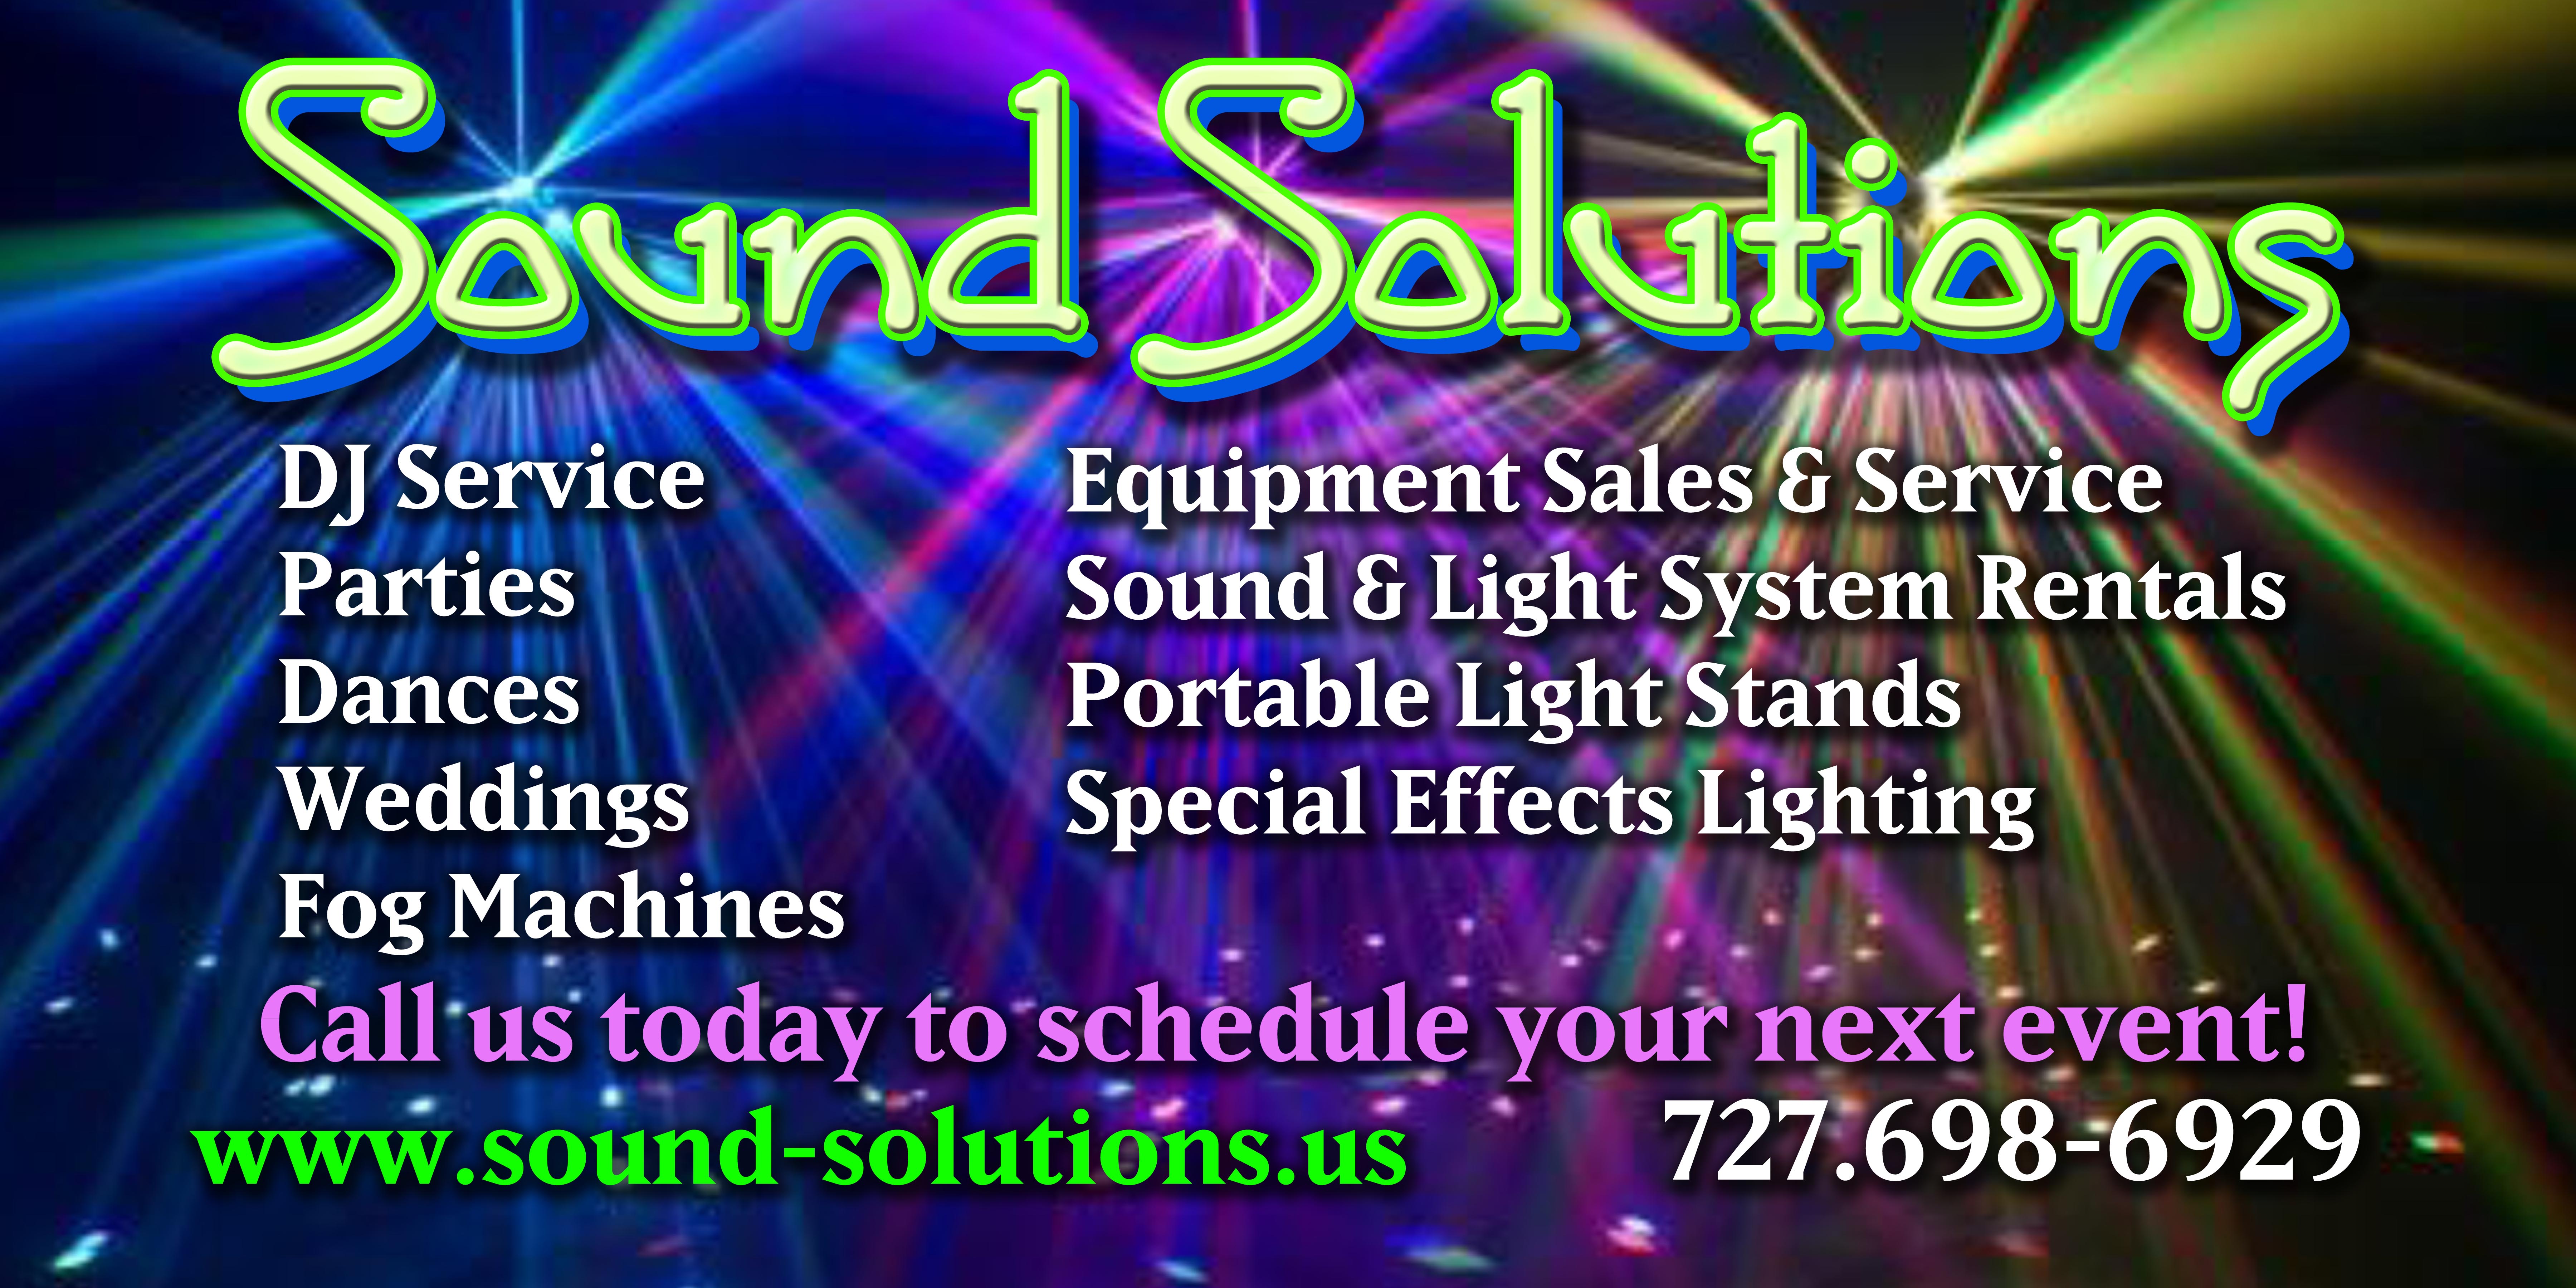 Sound Solutions DJ Services - Tampa - Clearwater FL